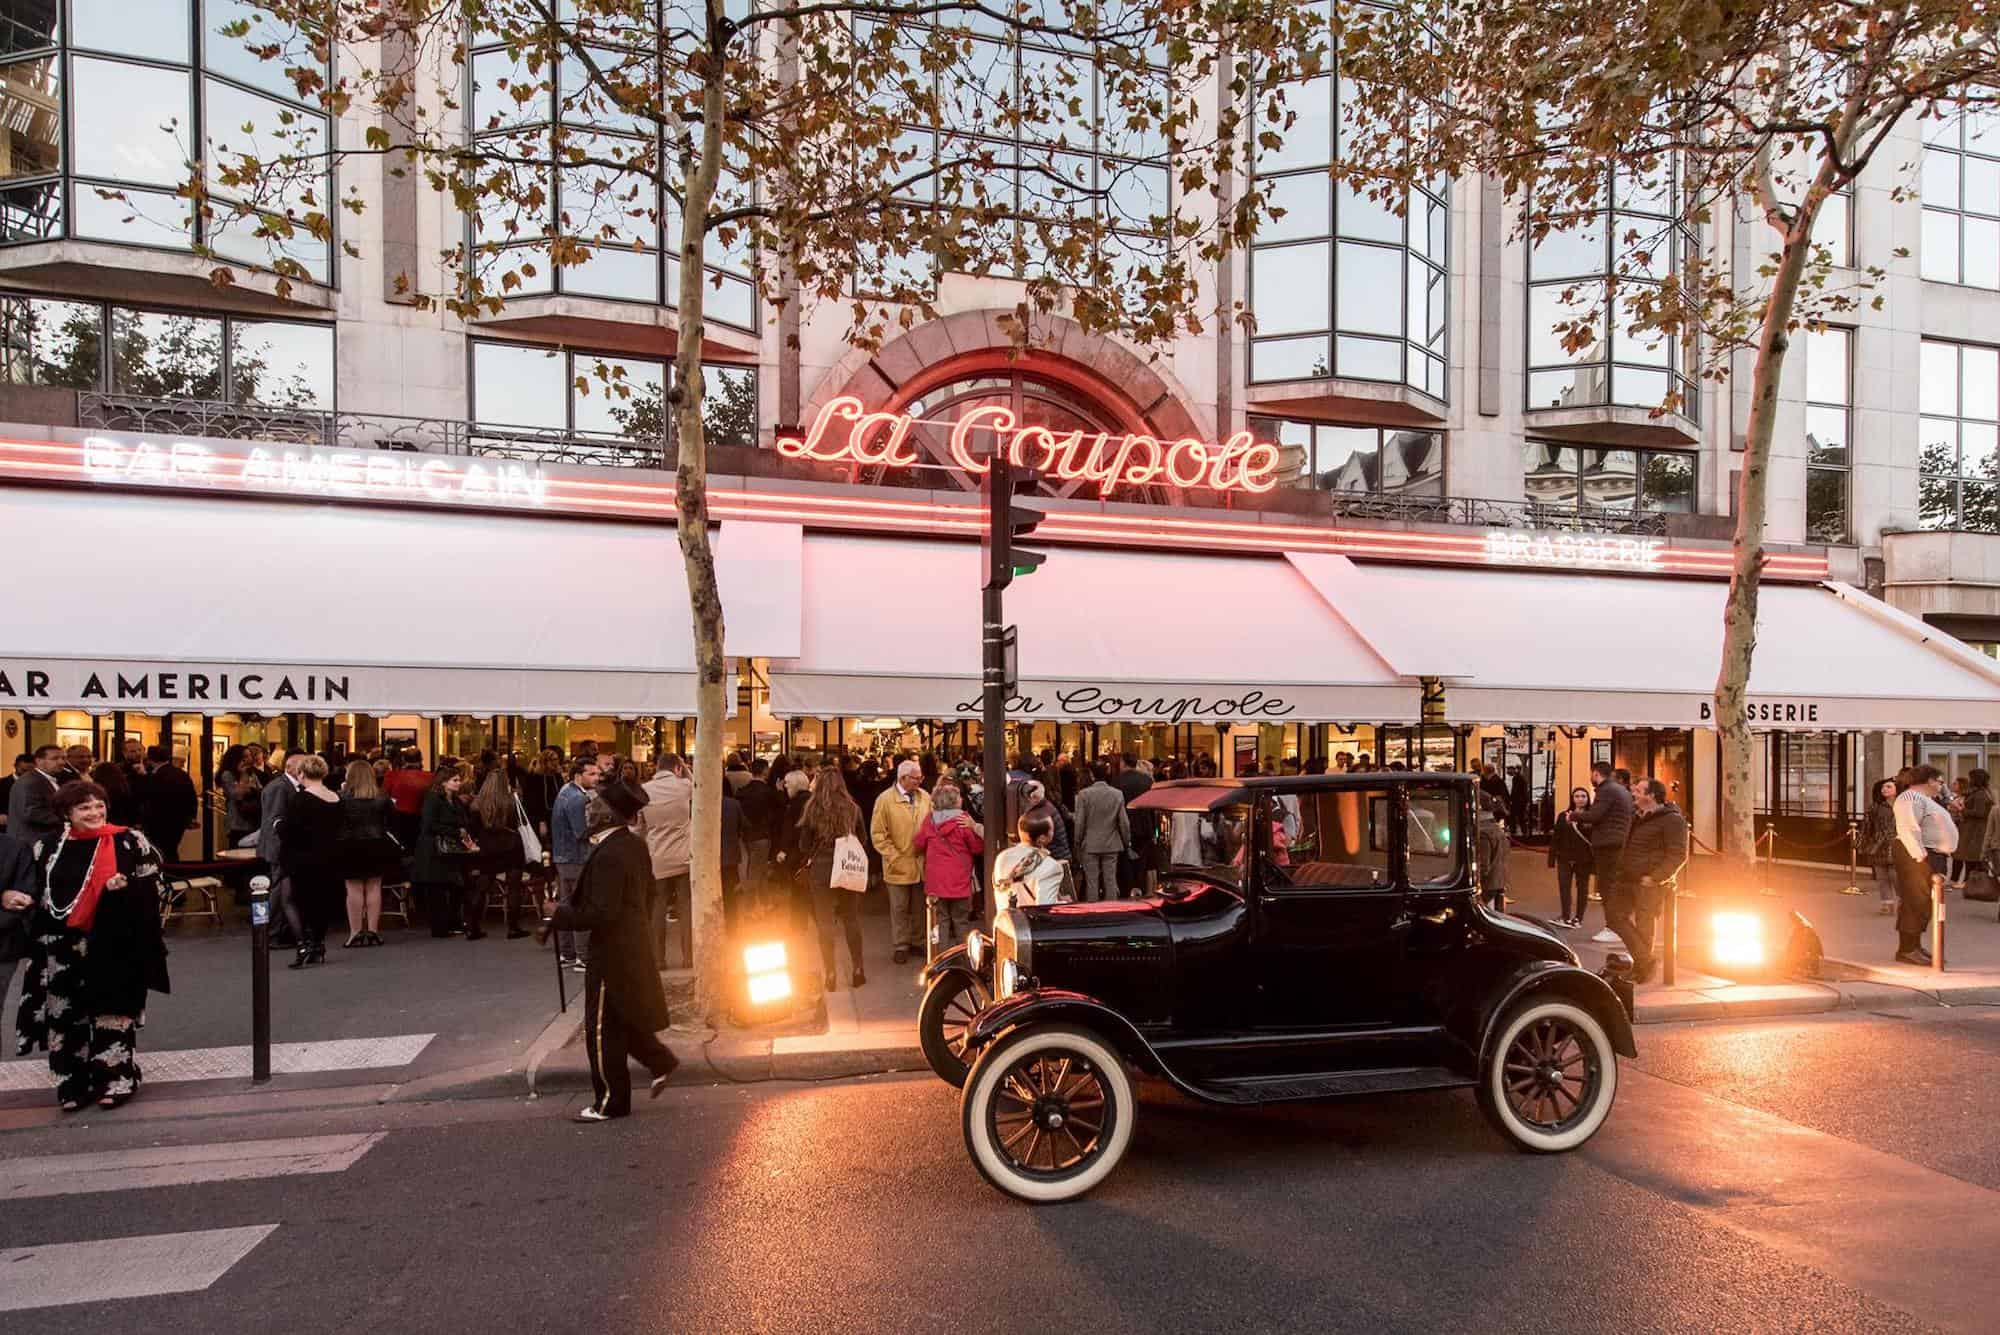 The exterior of La Coupole restaurant in Paris. A neon sign saying La Coupole, a white terrace shade, people standing in the terrace and an old fashioned black car parked out the front.